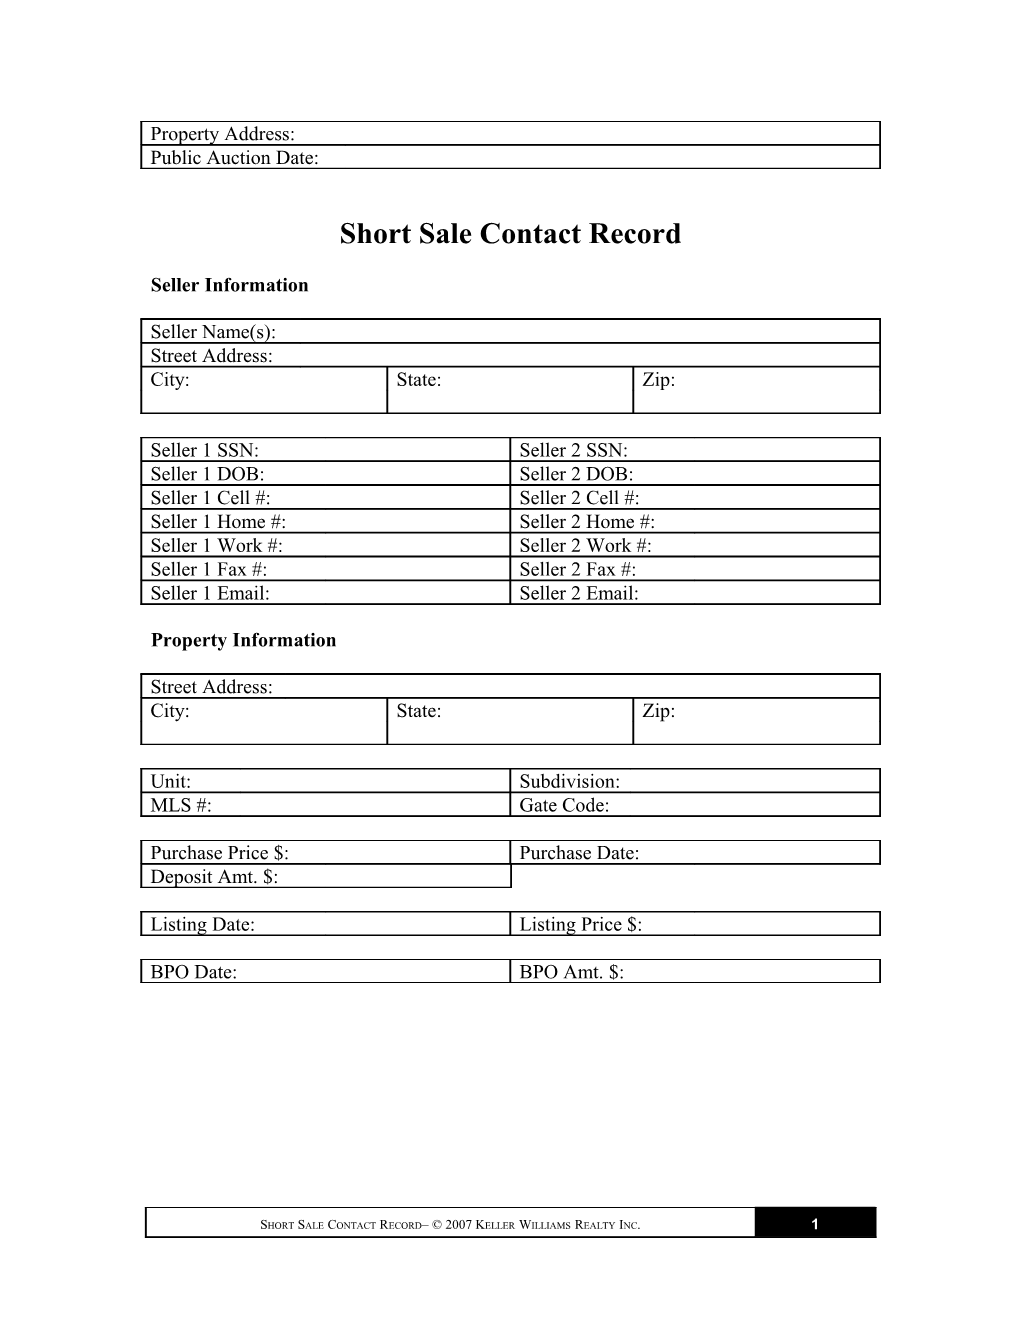 Short Sale Contact Record